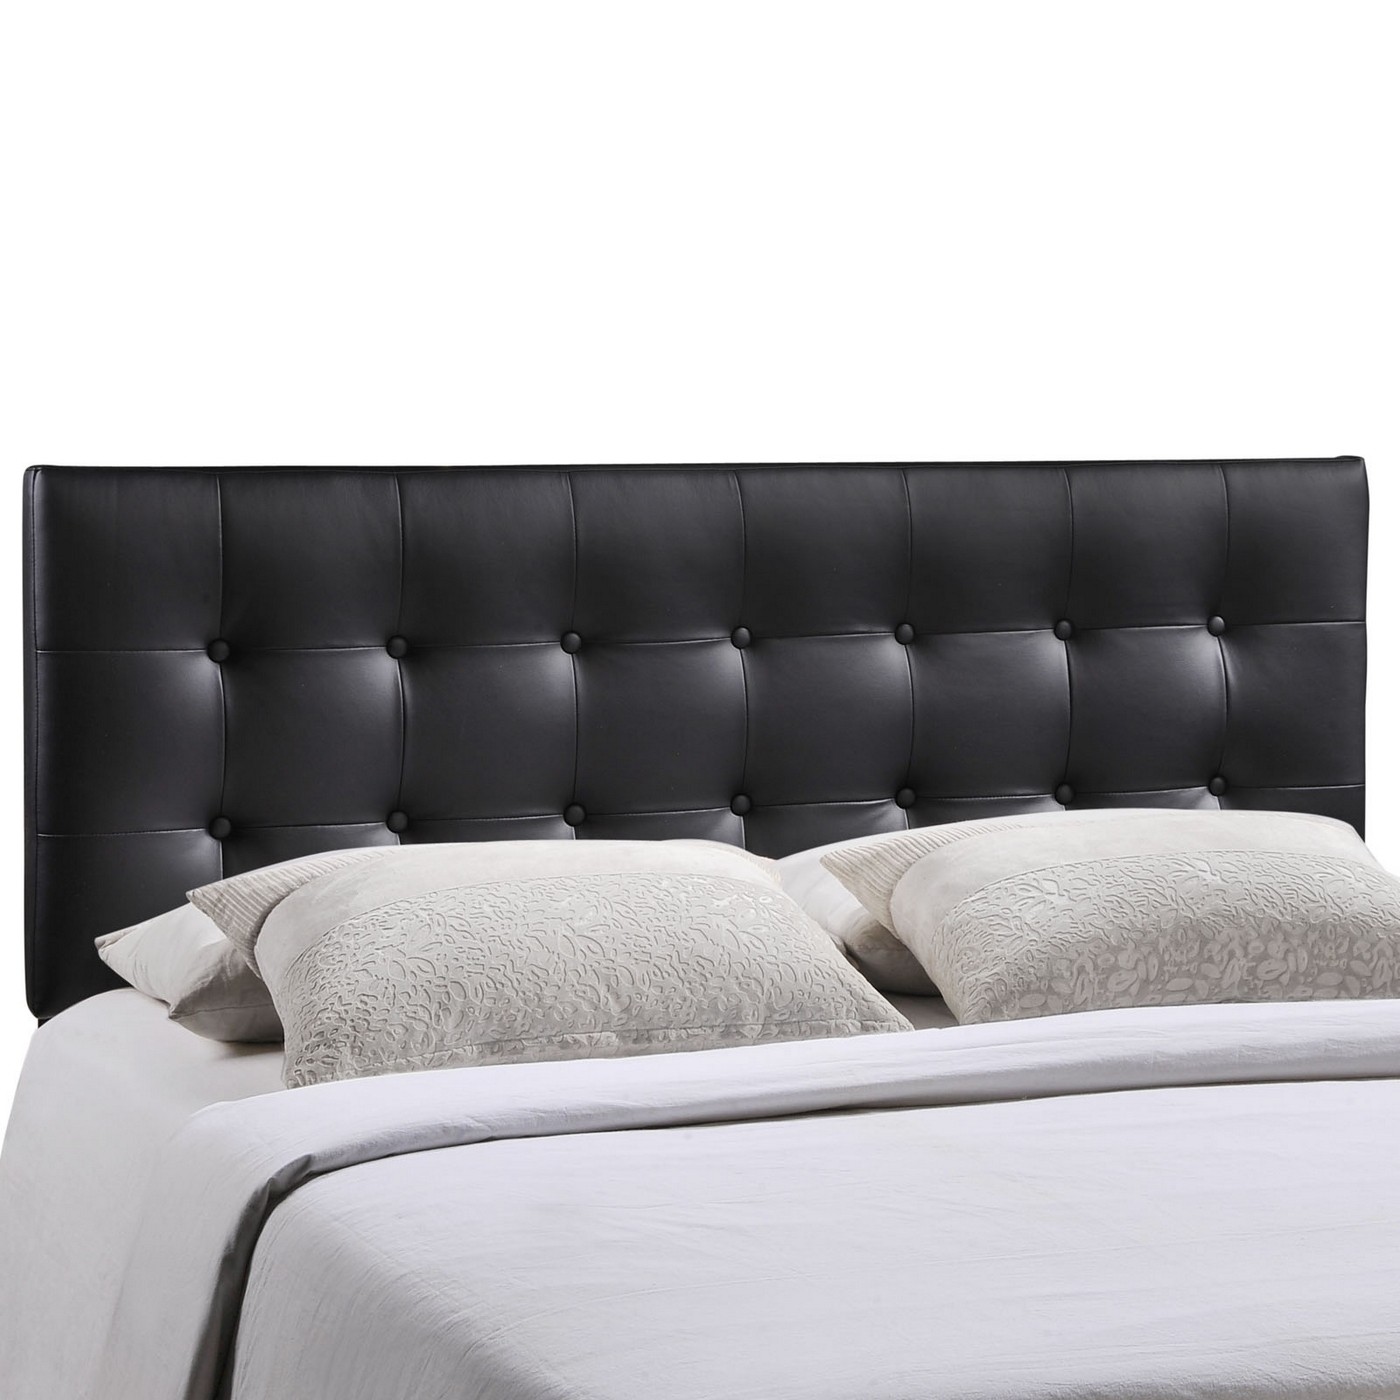 Emily modern button tufted queen faux leather headboard black